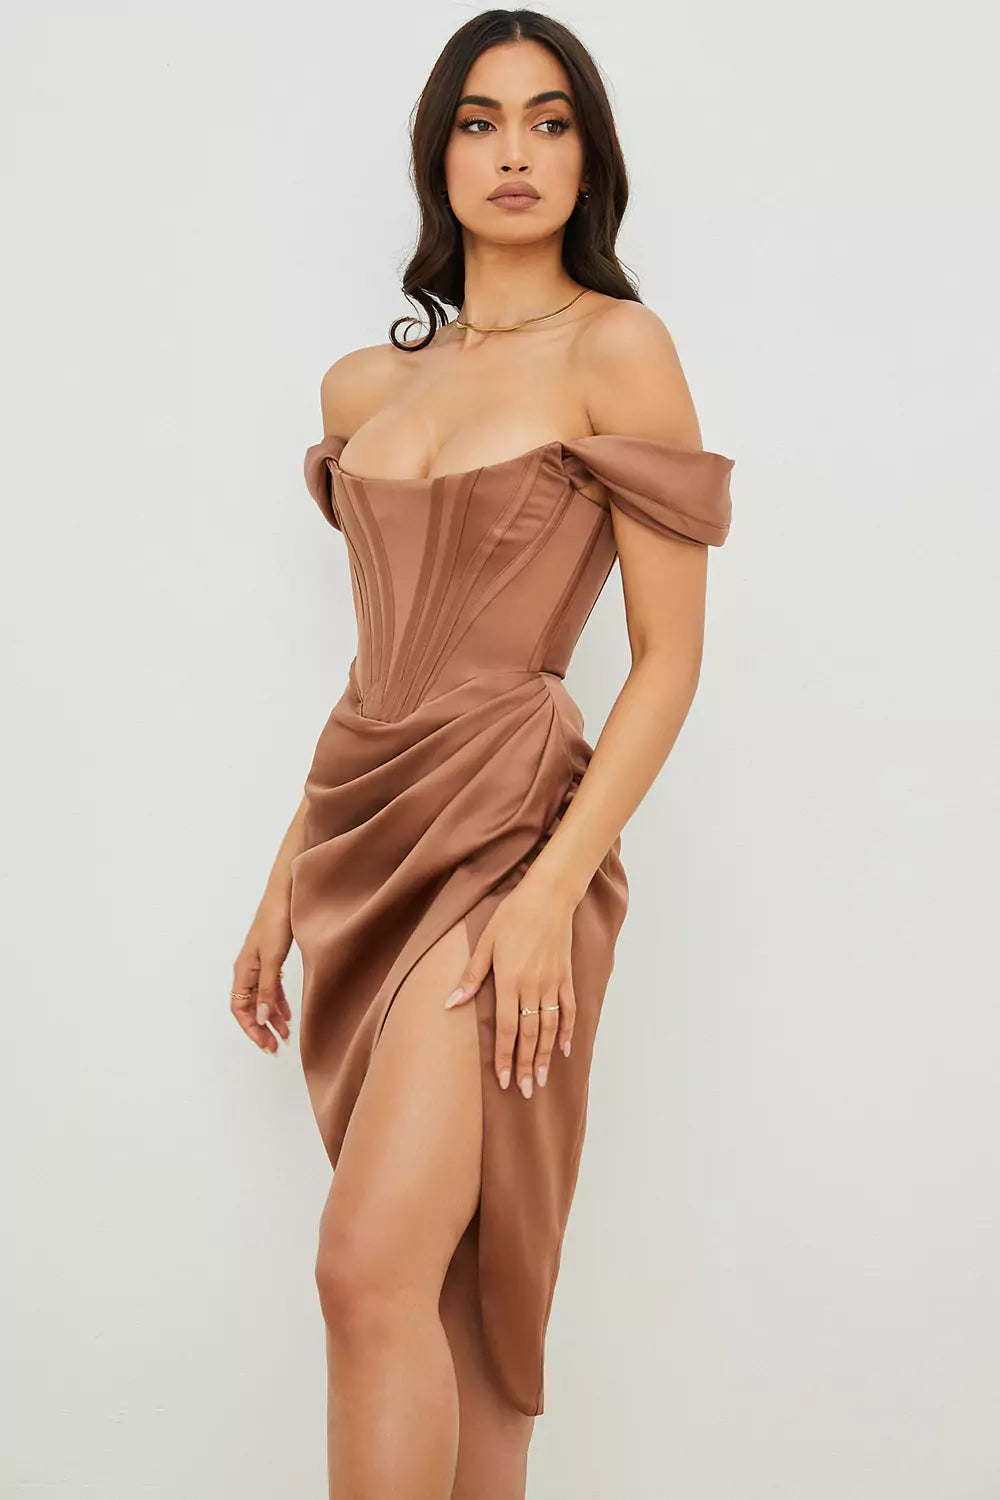 The model is wearing a brown satin dress with a high slit.